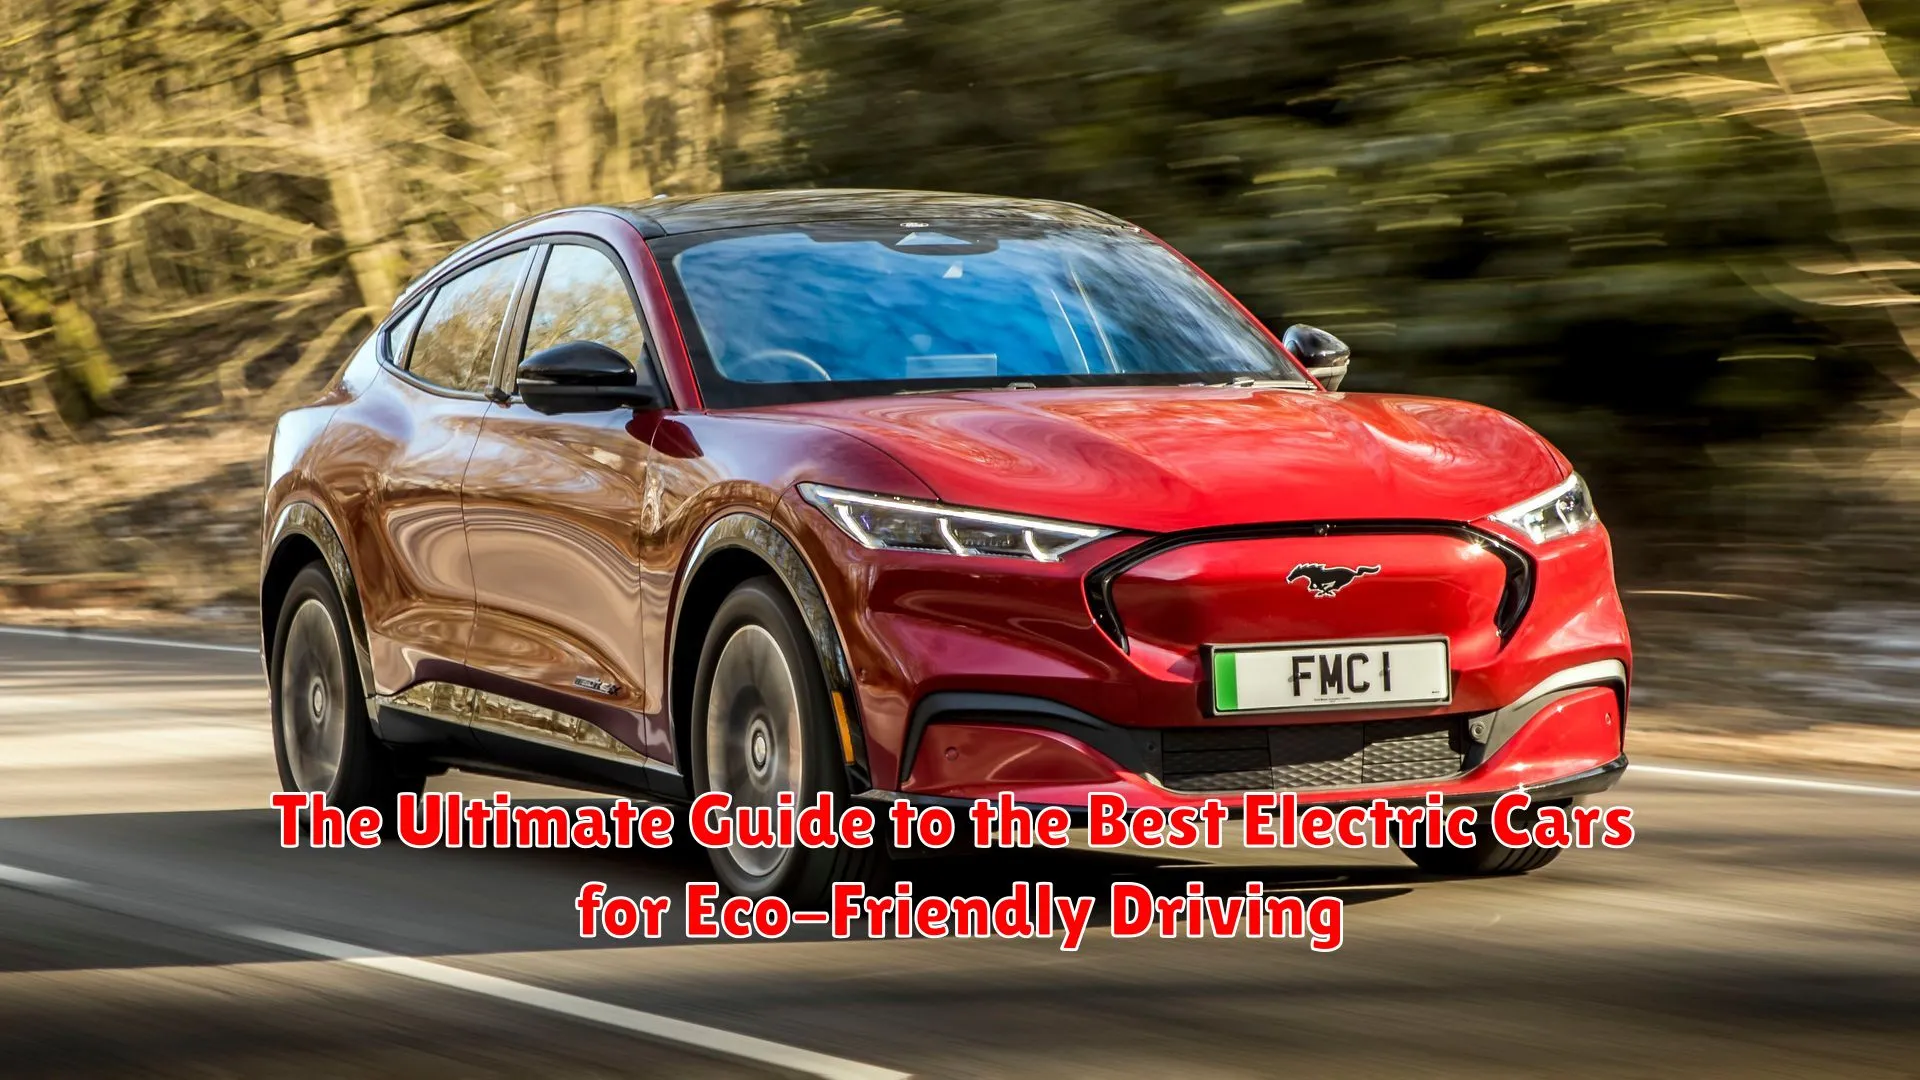 The Ultimate Guide to the Best Electric Cars for Eco-Friendly Driving